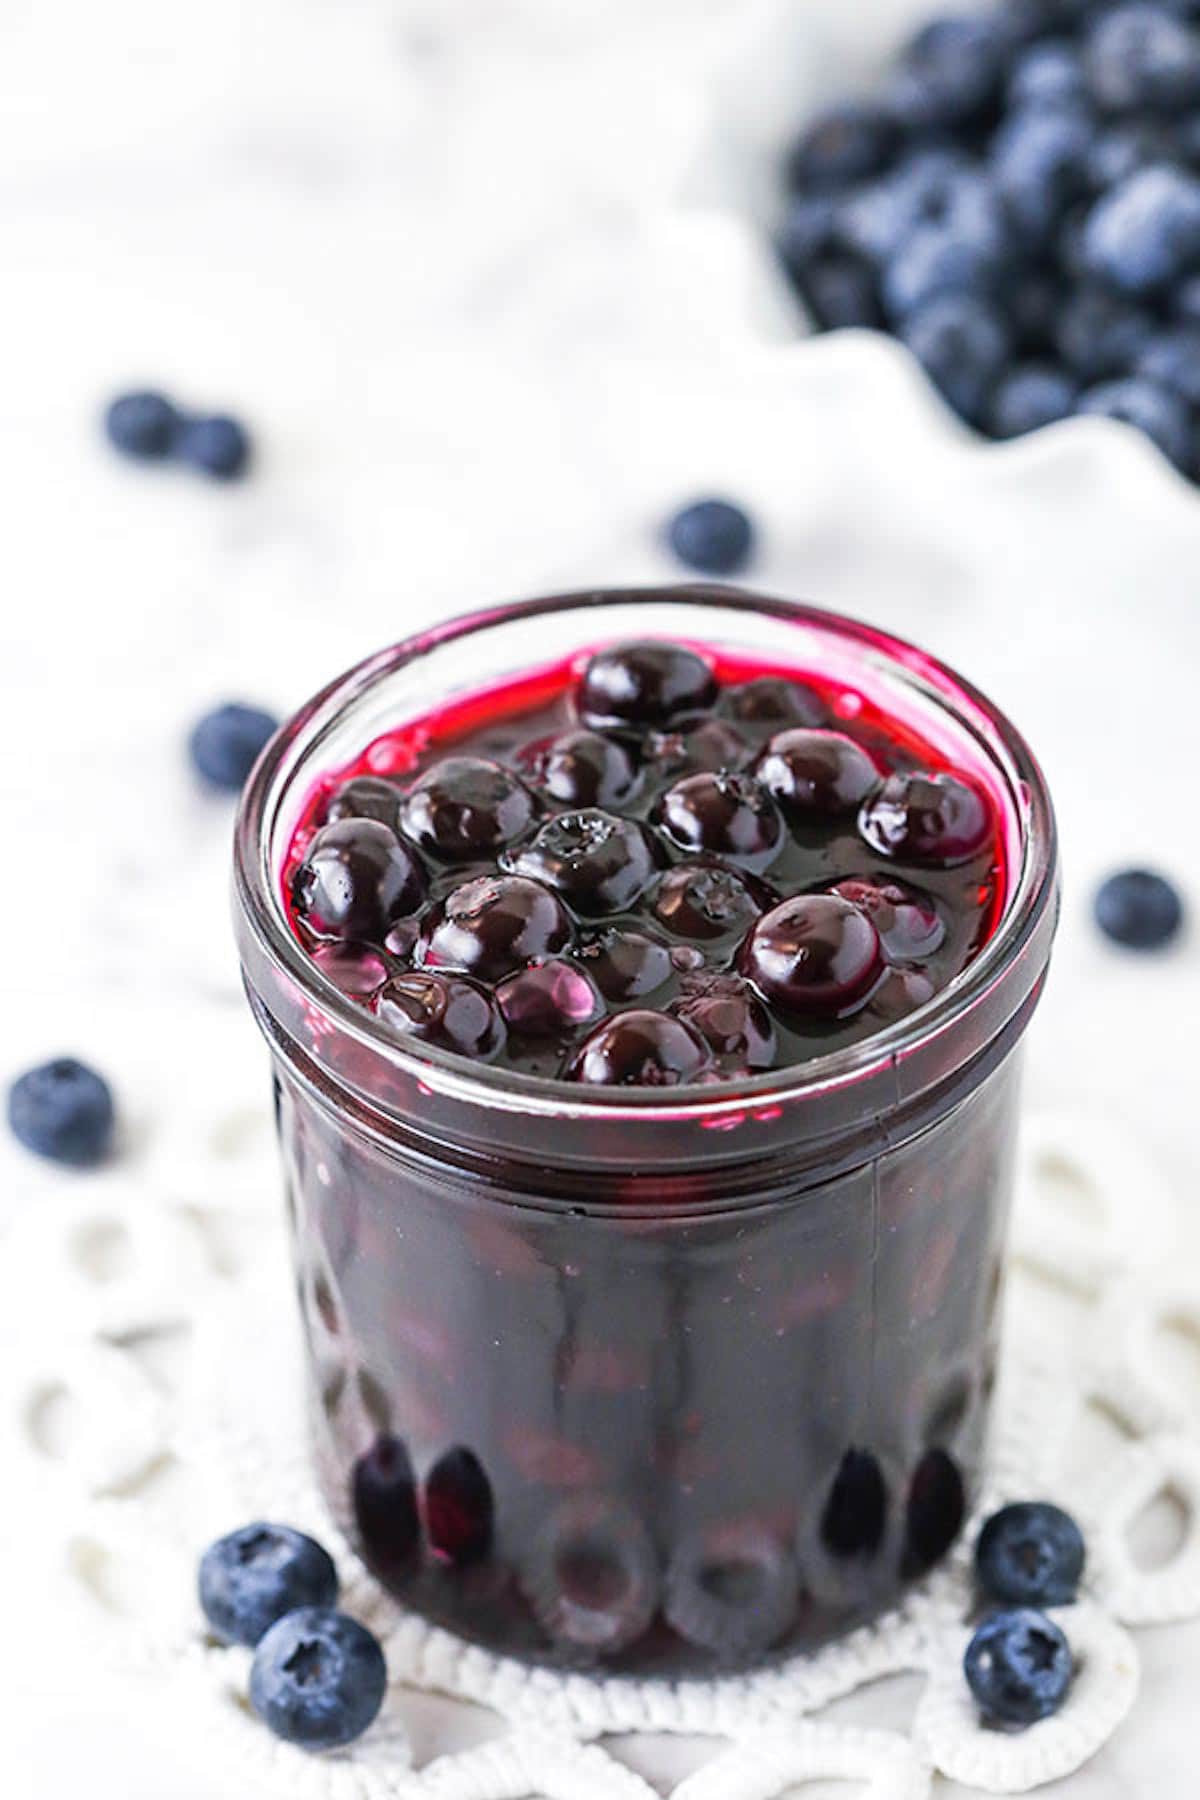 A Close-Up Shot of Homemade Blueberry Sauce in a Glass Jar Next to a Few Fresh Blueberries